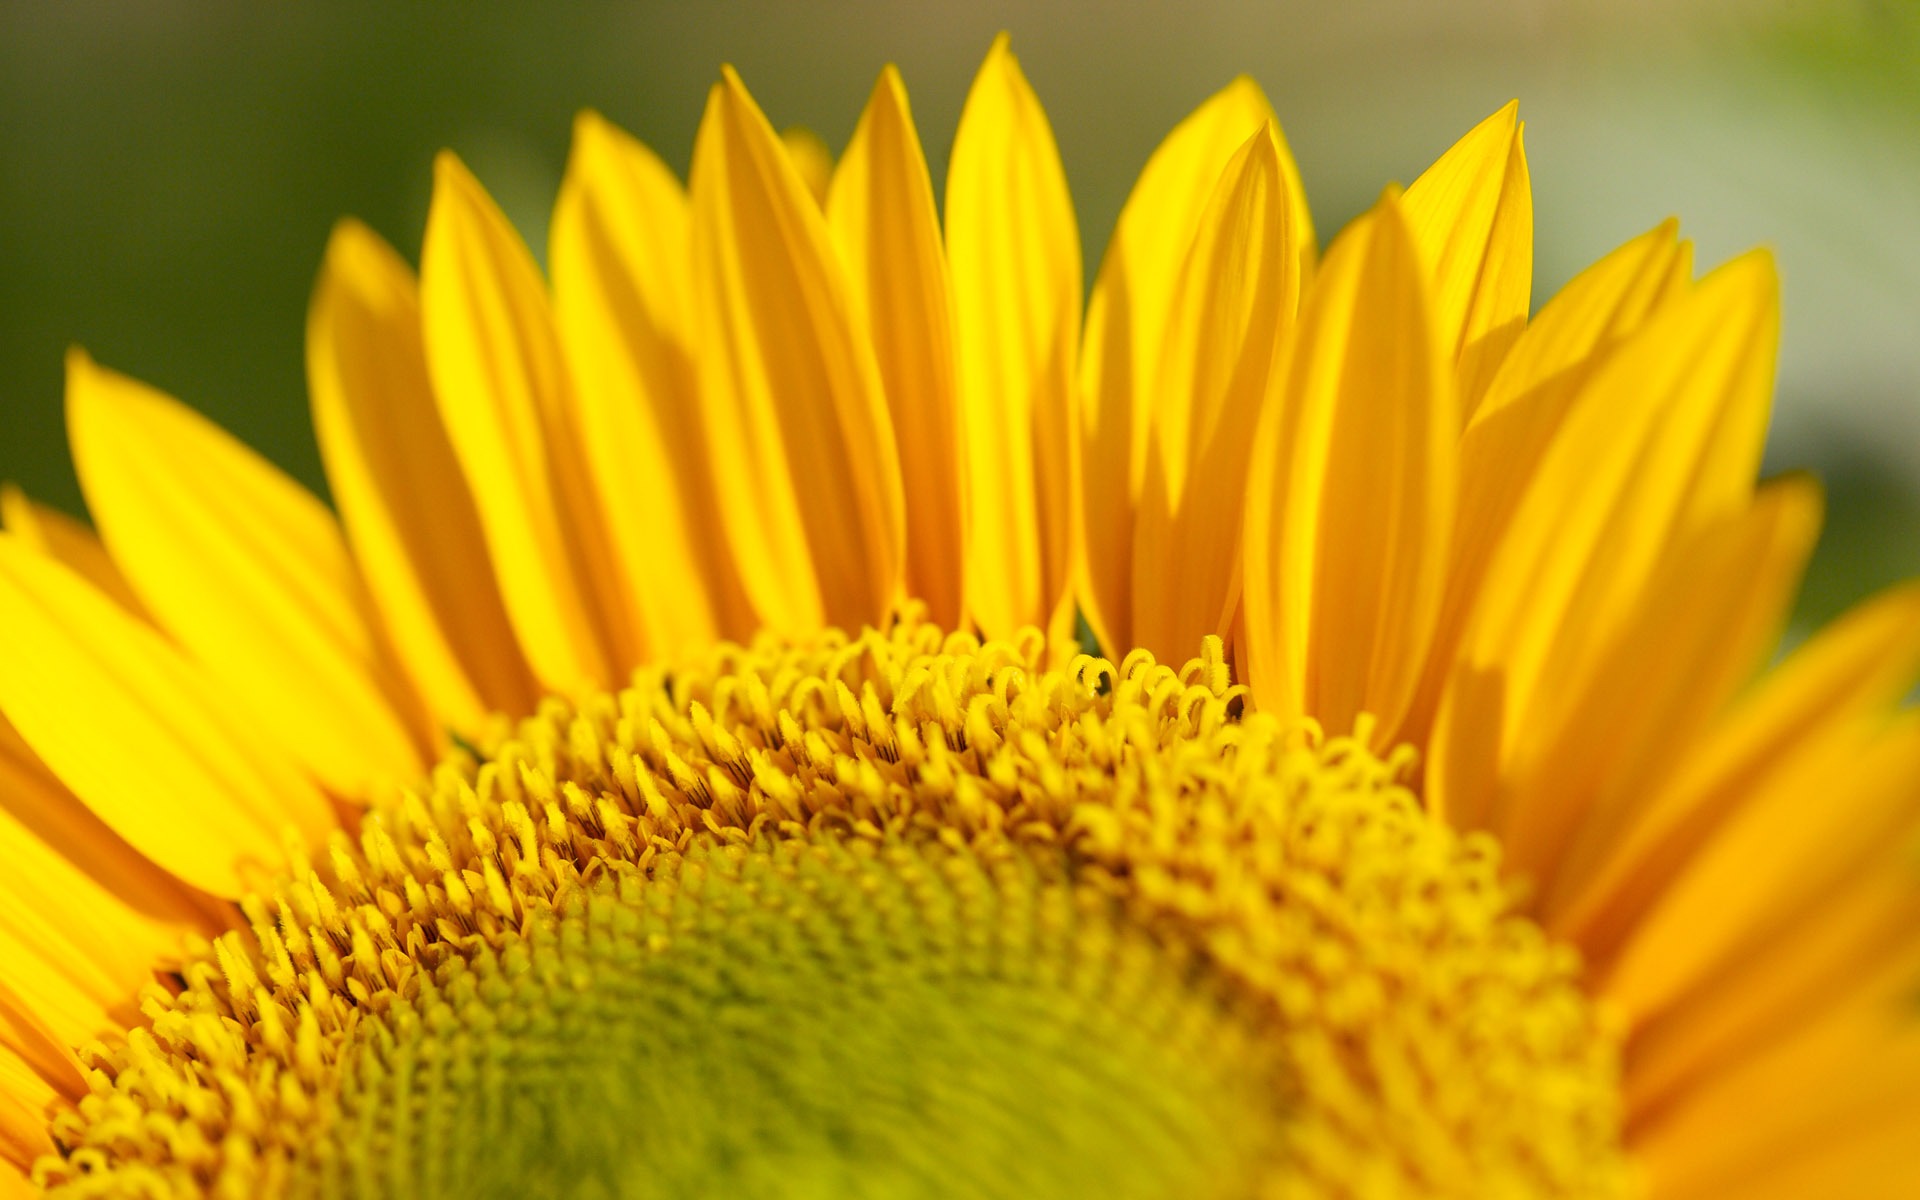 Sunny sunflower photo HD Wallpapers #29 - 1920x1200